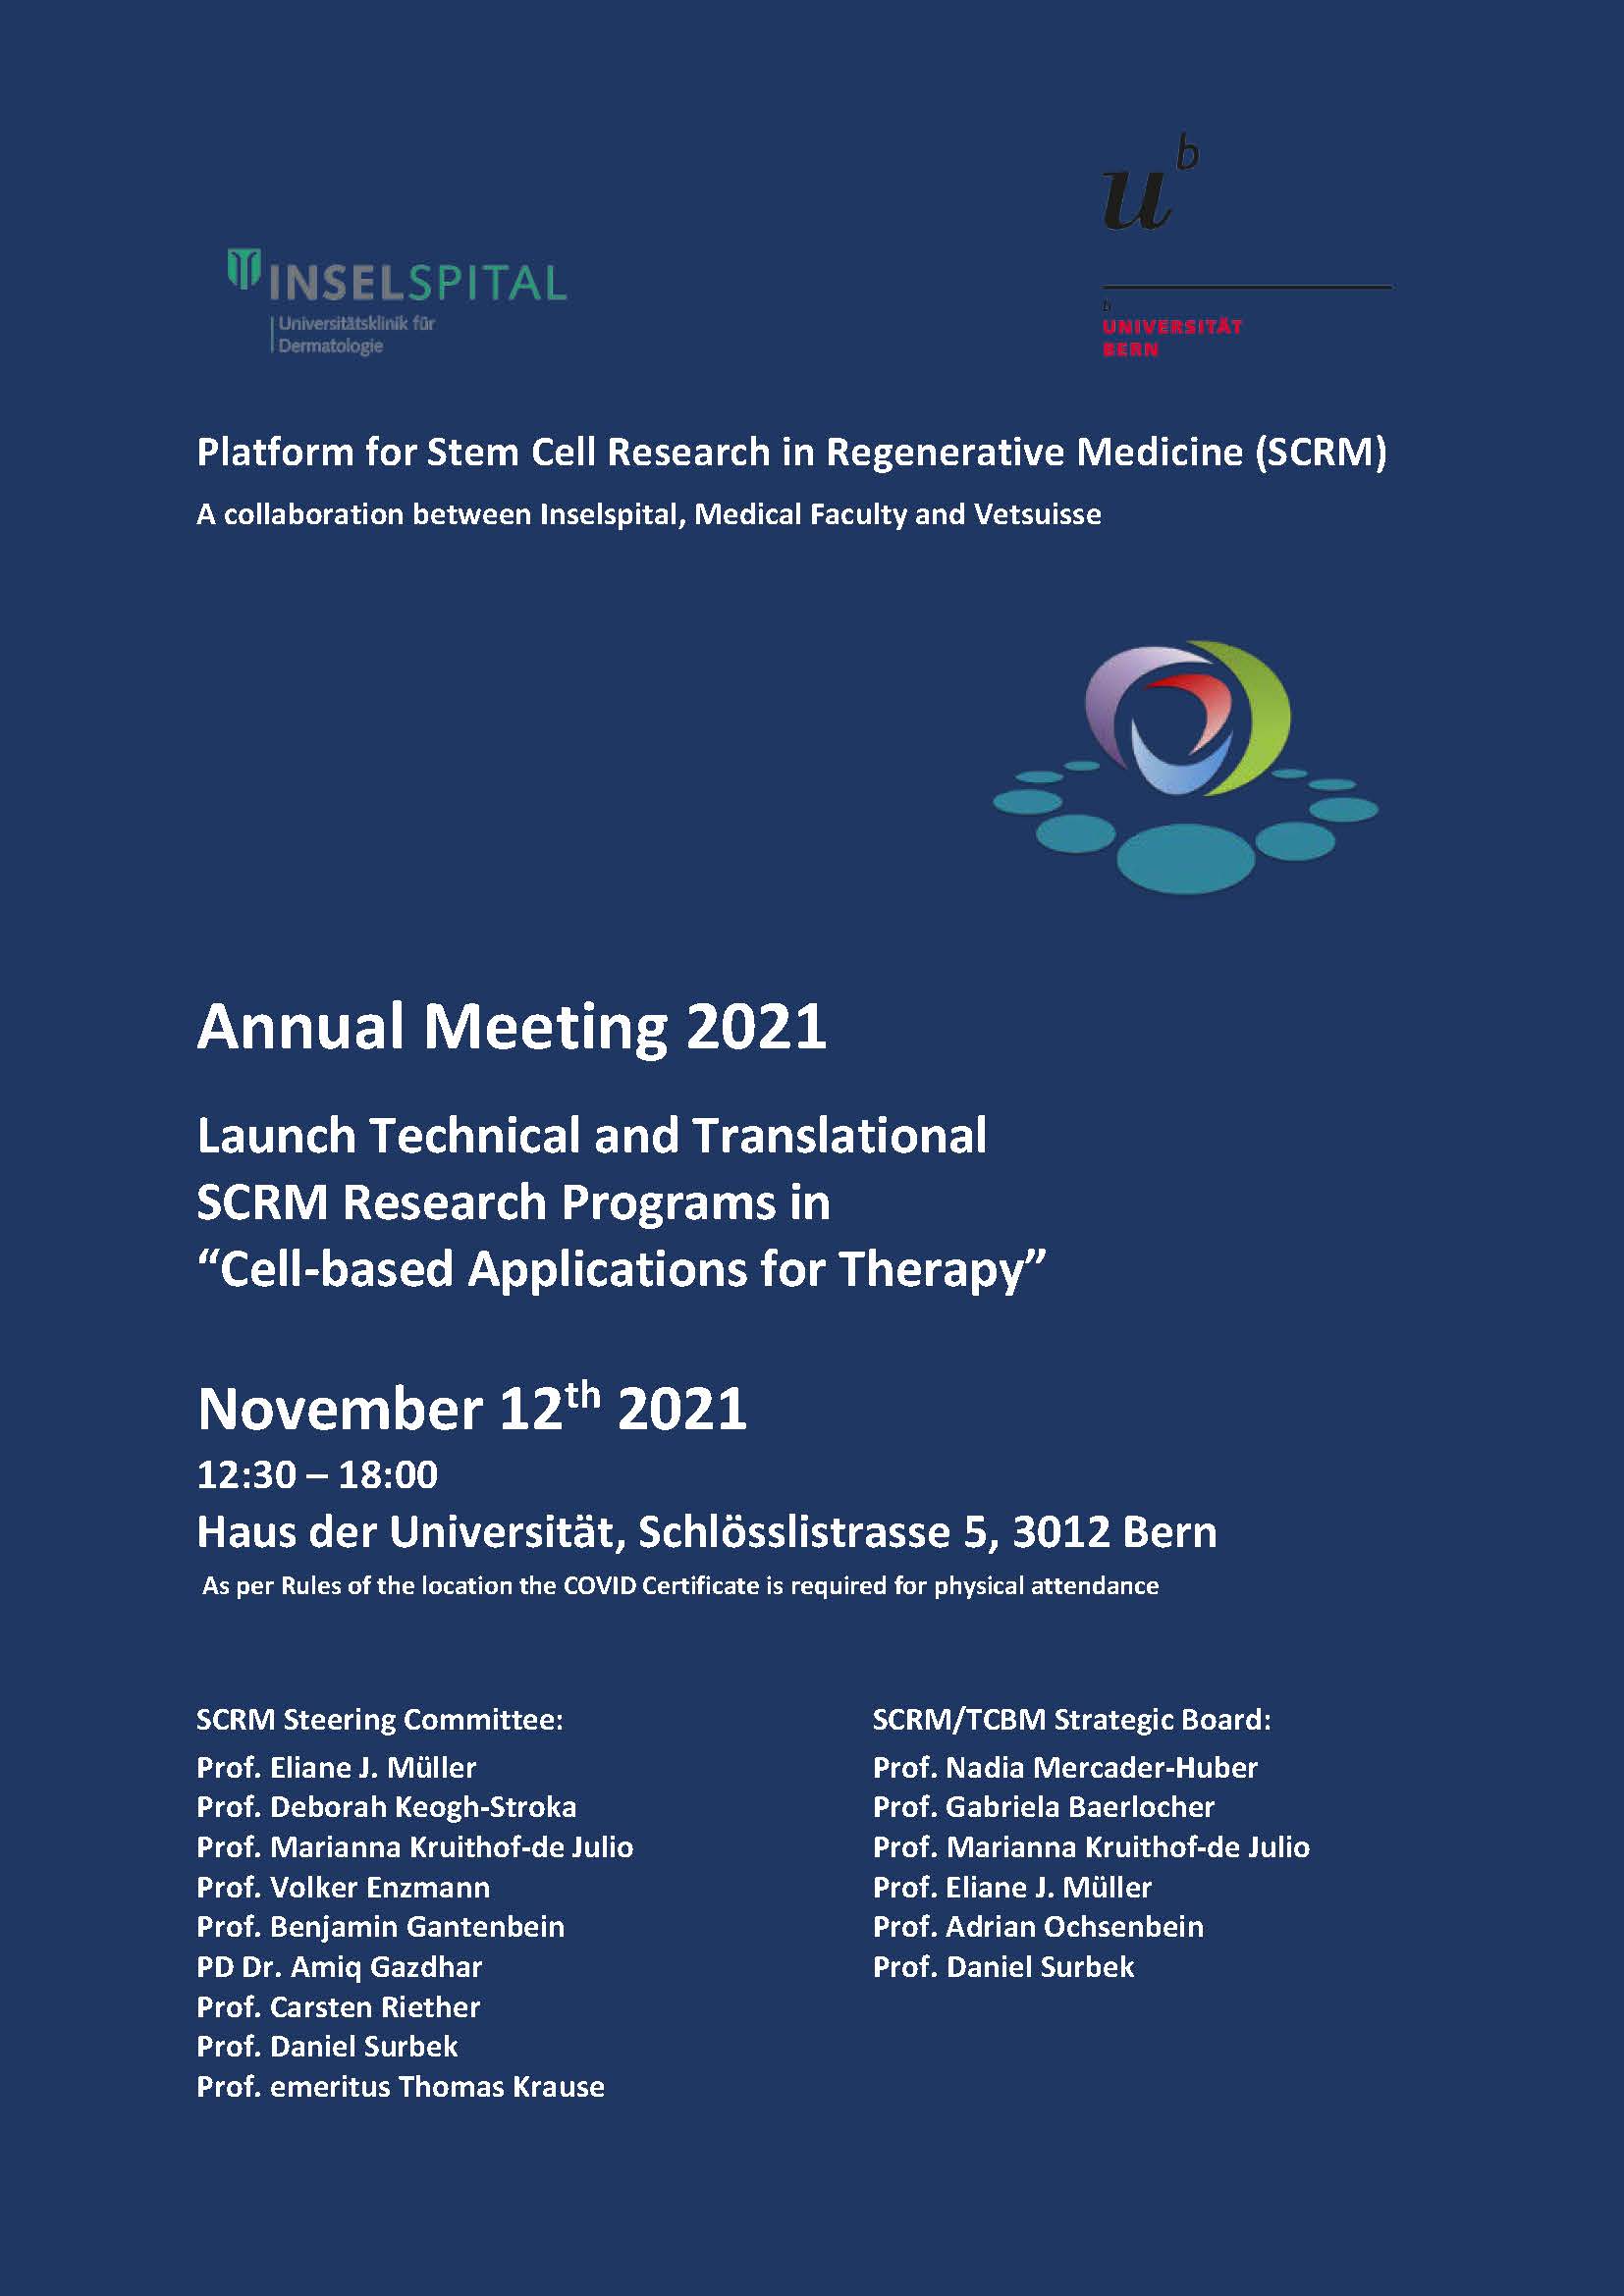 SCRM Annual Meeting 2021 flyer